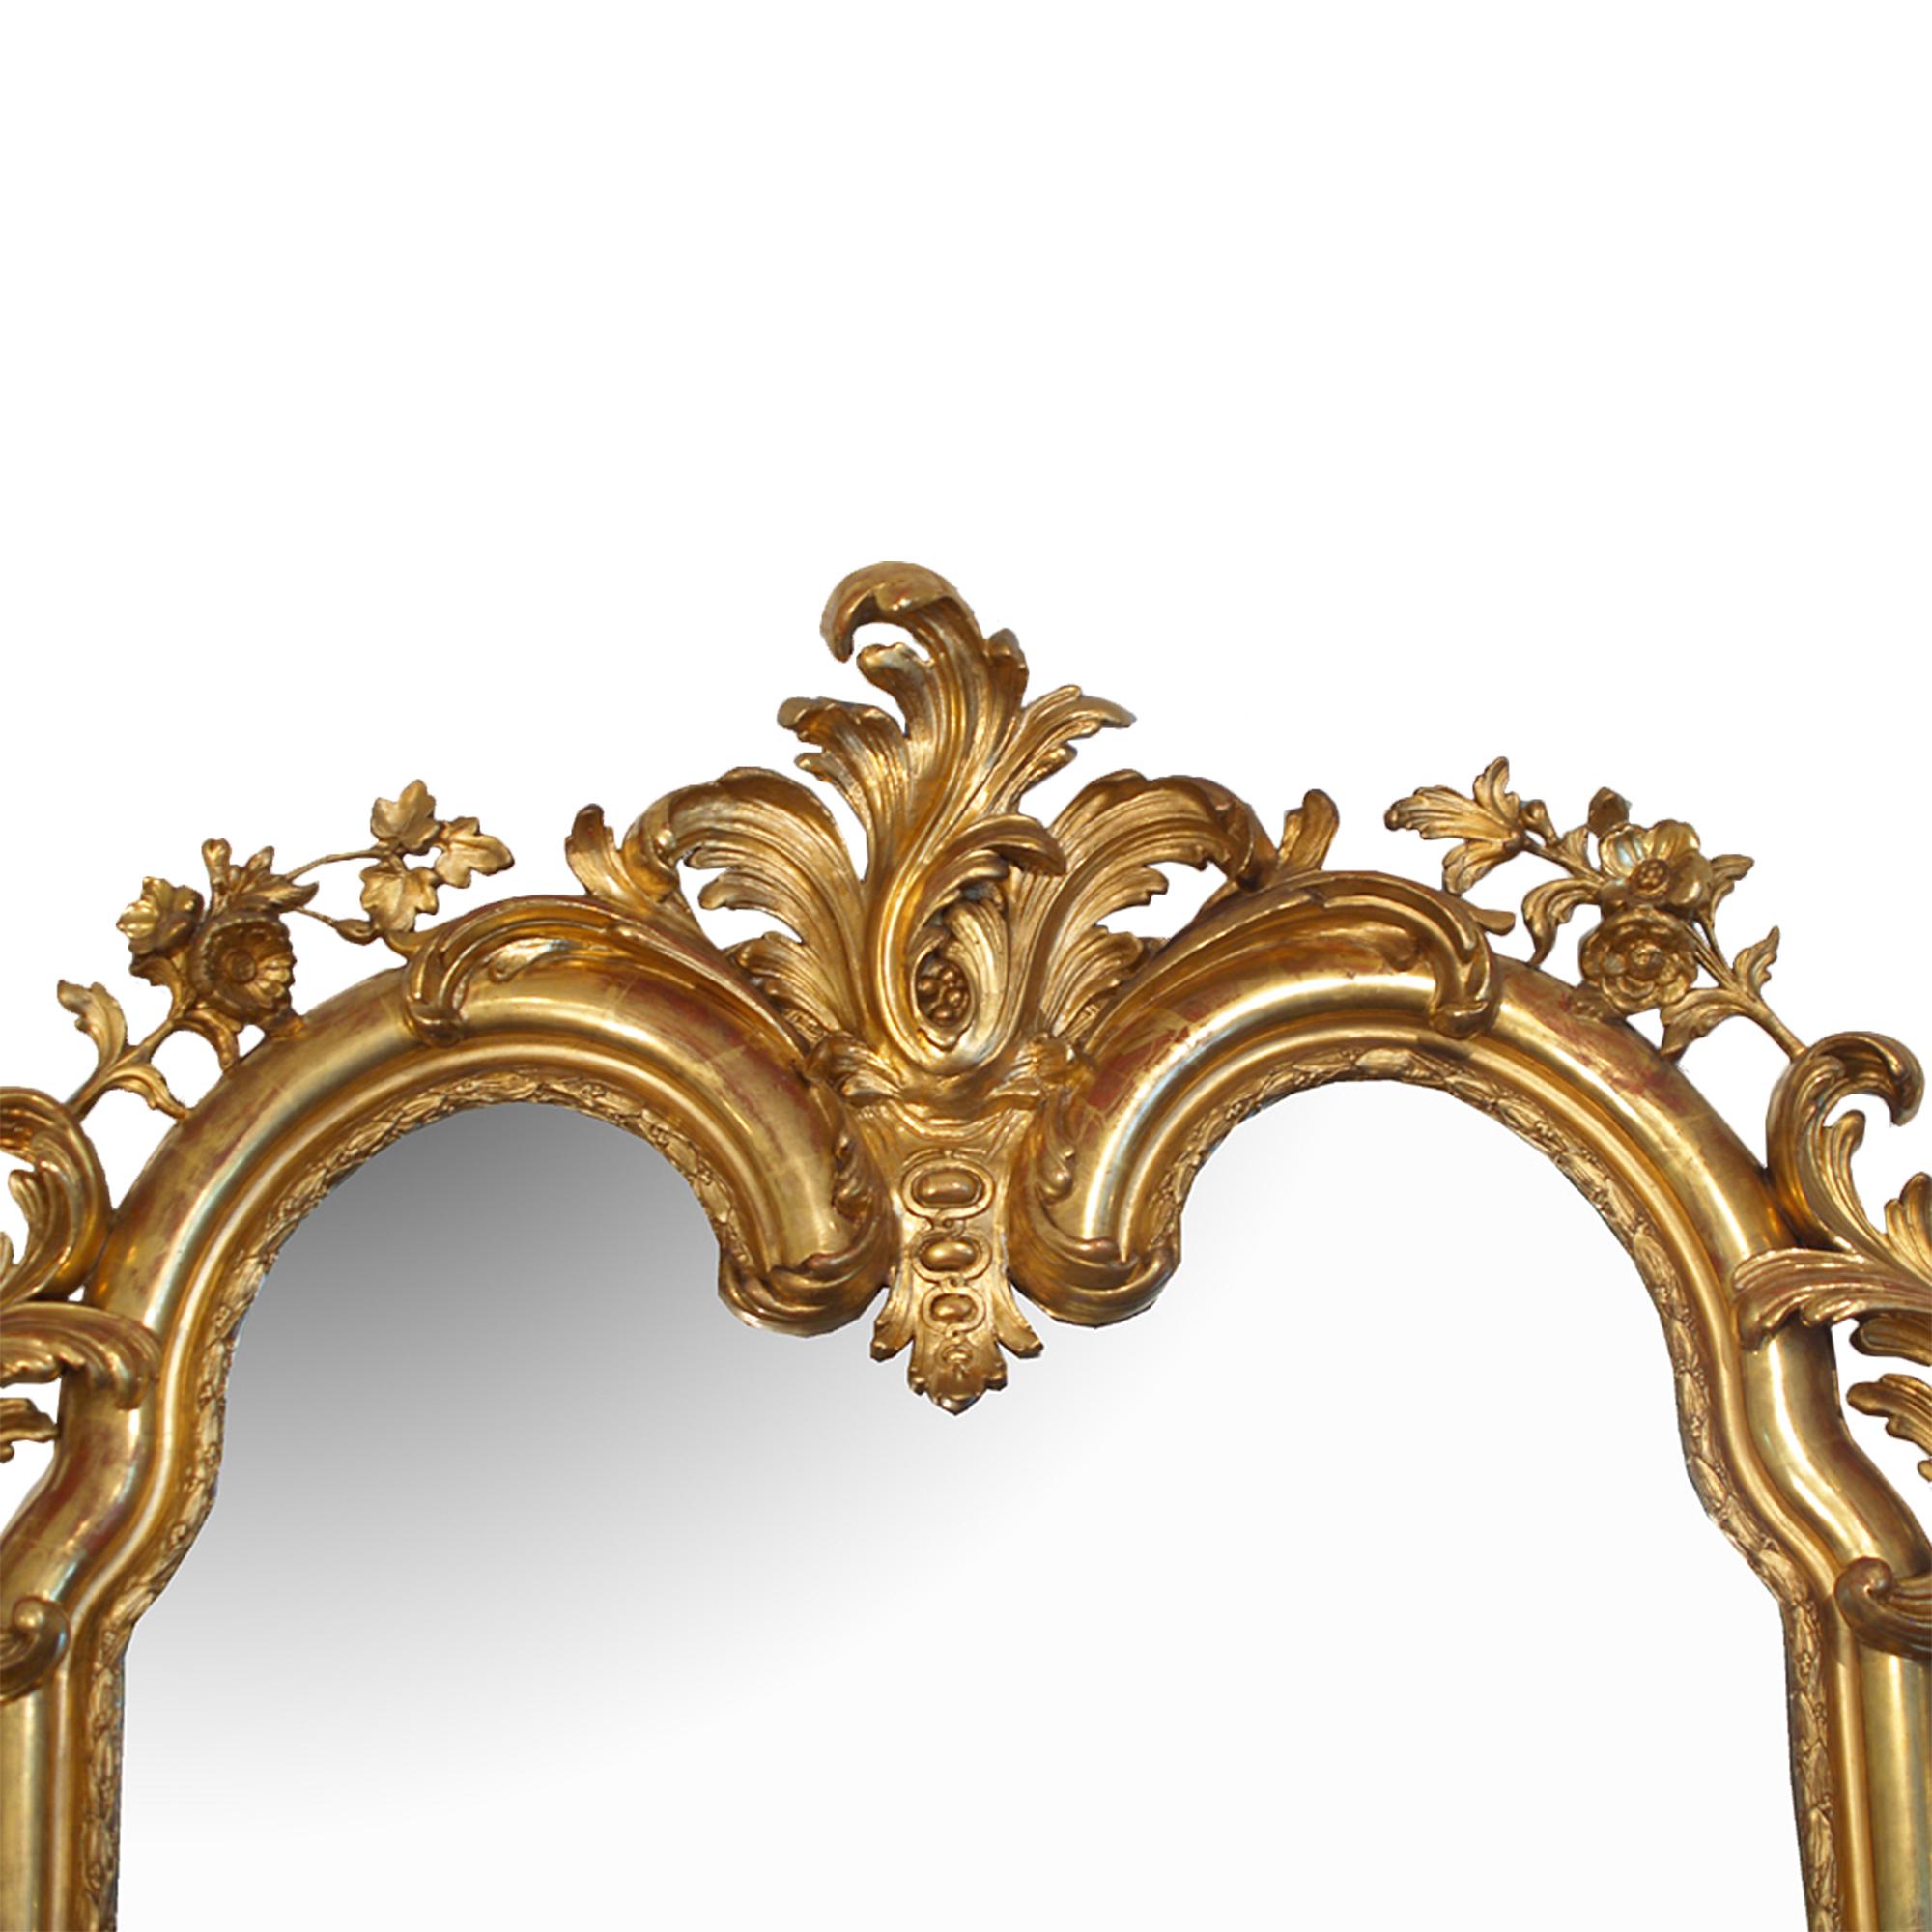 A very dynamic 19th century Louis XV giltwood mirror with original gilt and mirror plate. At the top and bottom large scrolling acanthus leaves amidst blossoming floral. The impressive top crown with a striking central acanthus leaves among scrolls